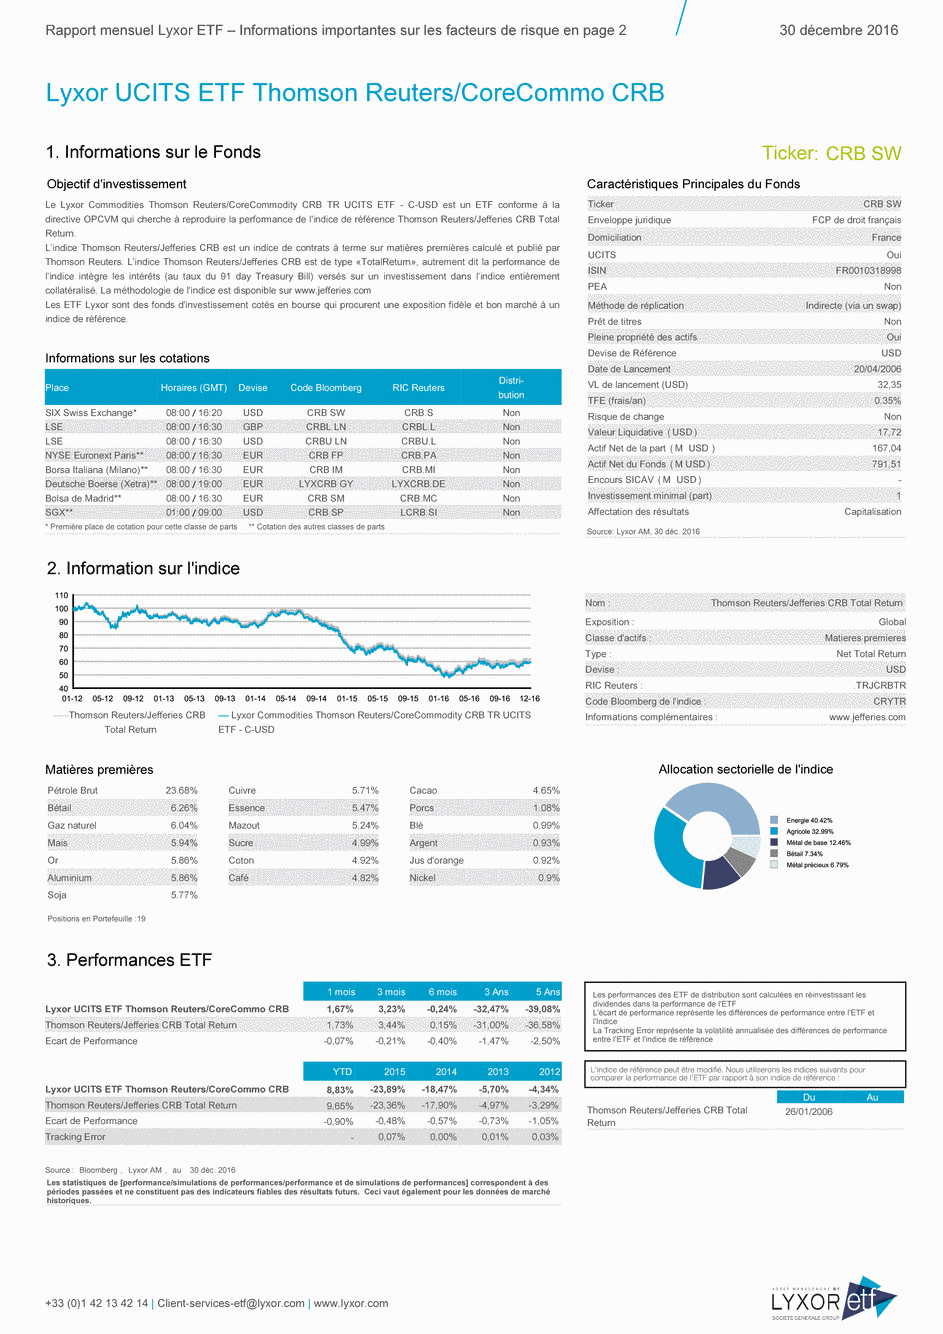 Reporting LYXOR COMMODITIES THOMSON REUTERS/CORECOMMODITY CRB TR UCITS ETF C-USD - 30/12/2016 - Français